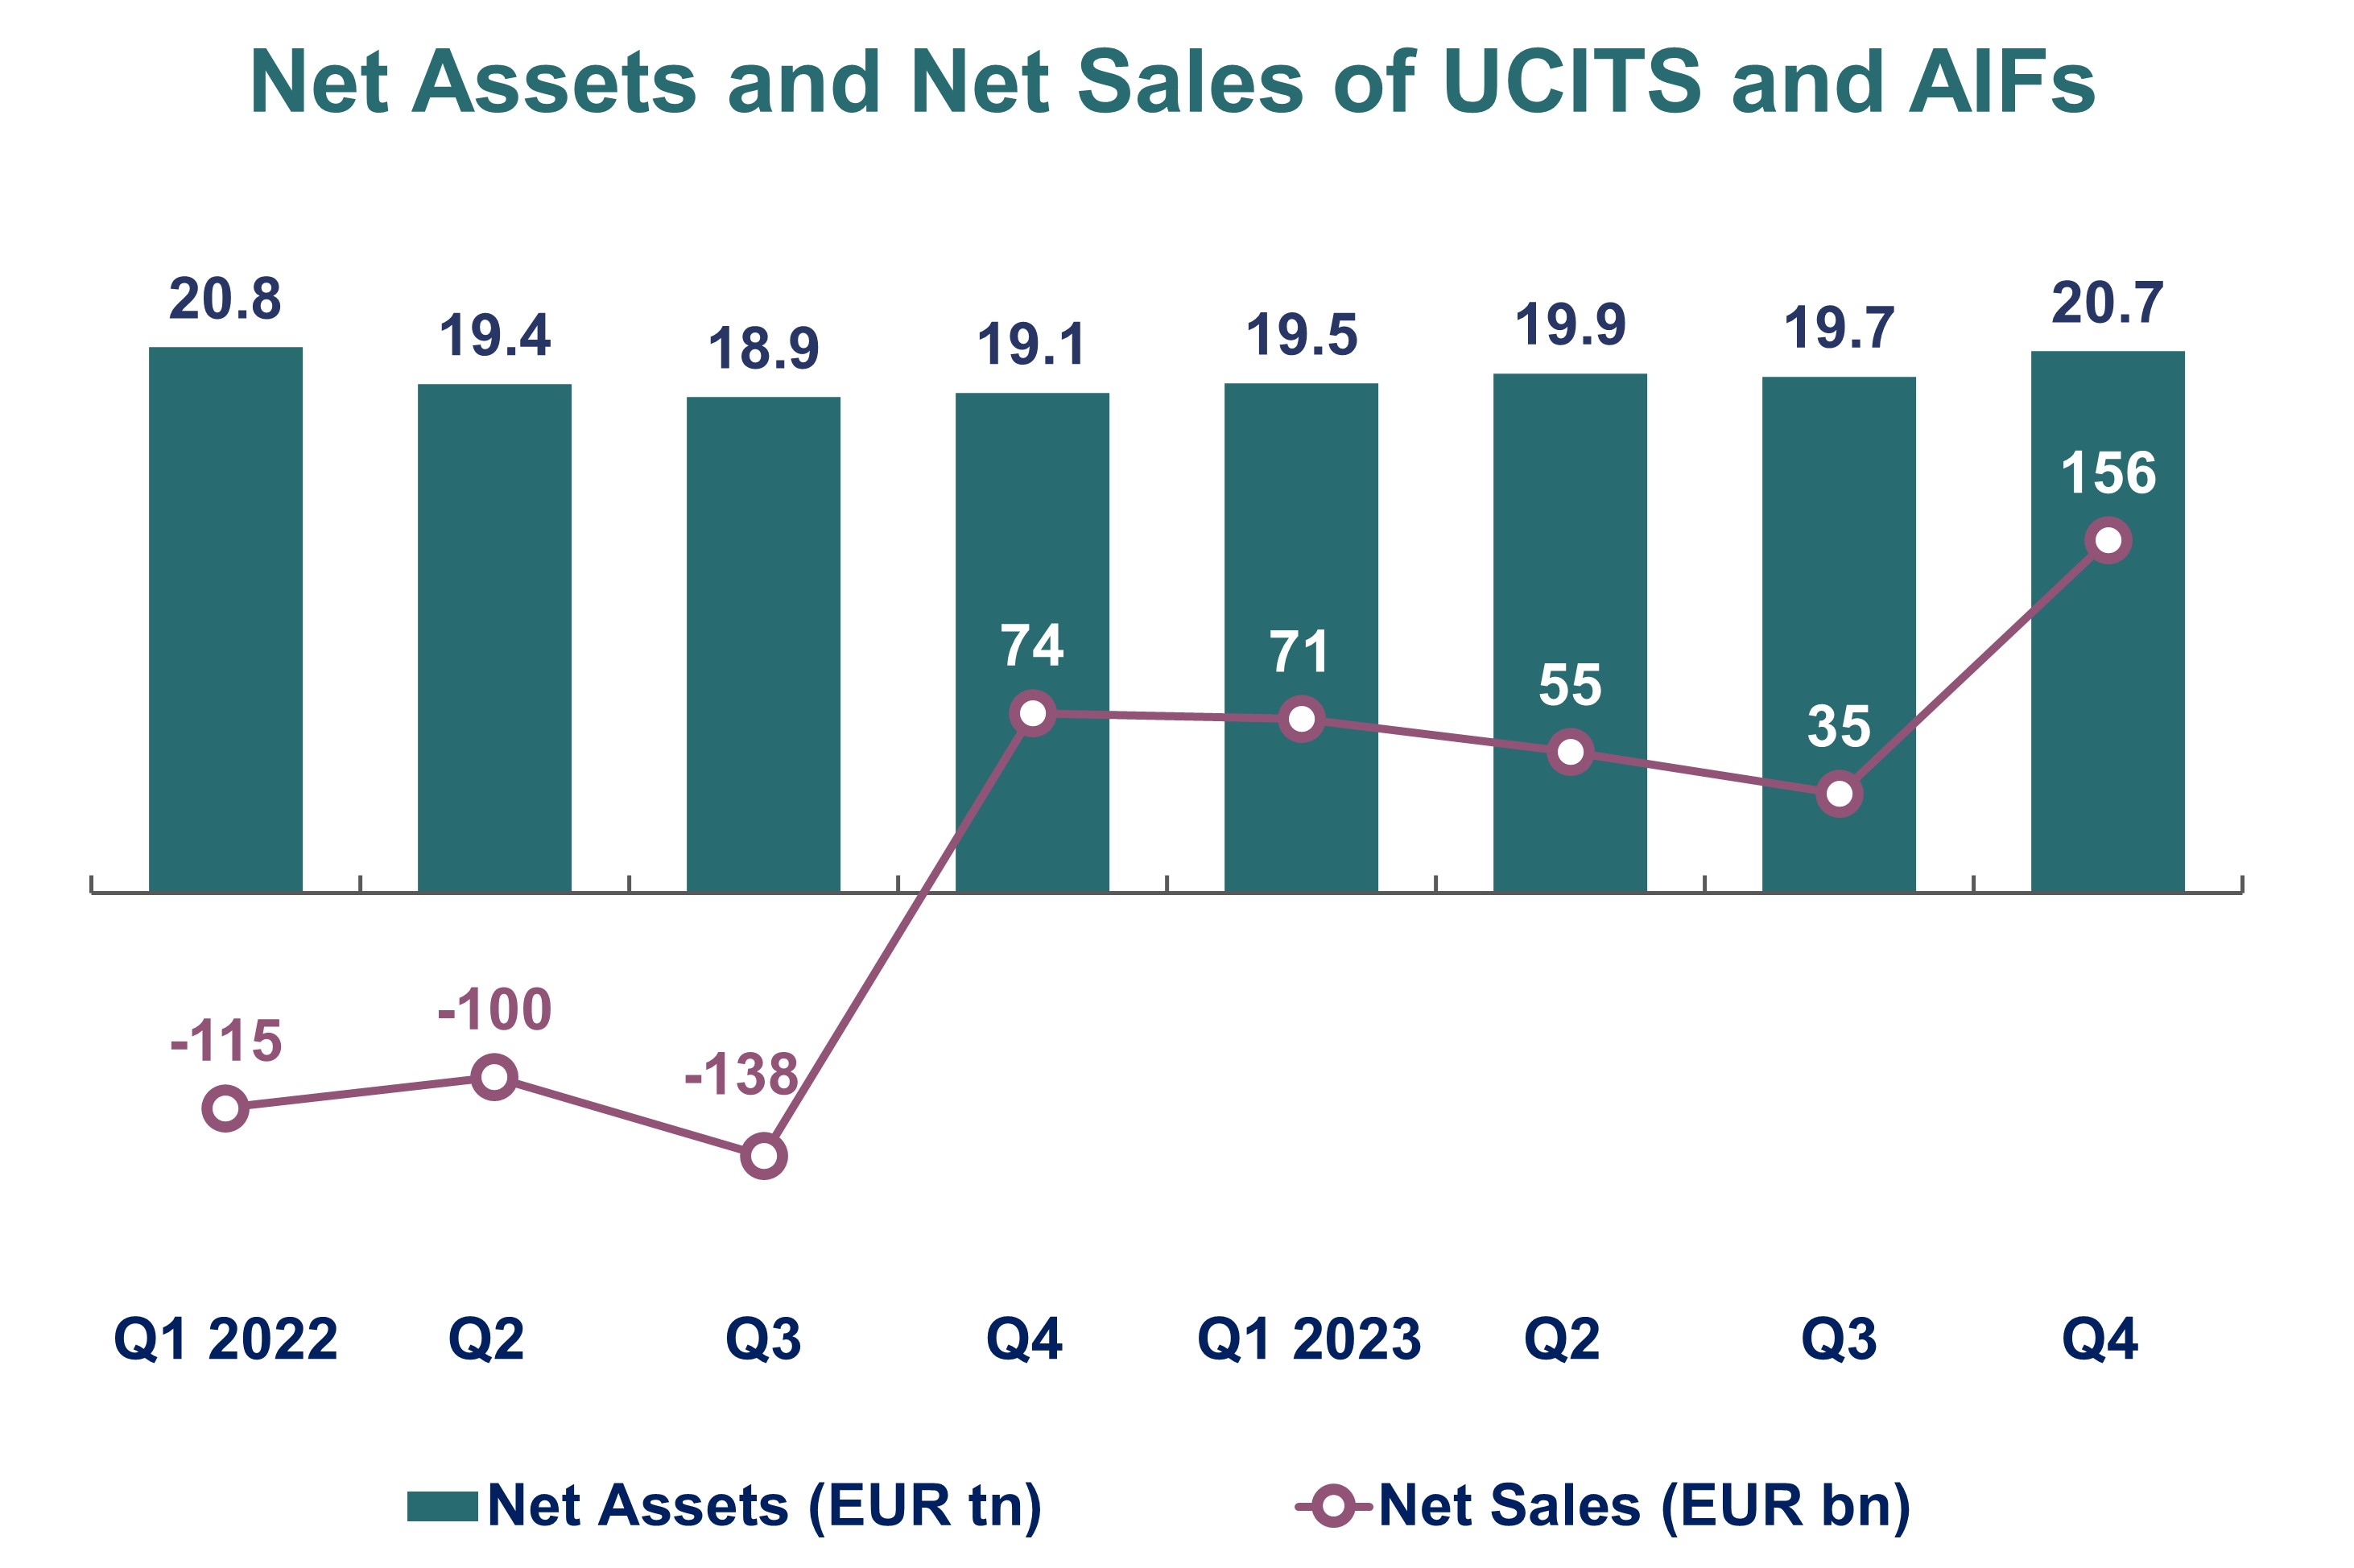 Chart showing net assets and net sales of UCITS and AIFs